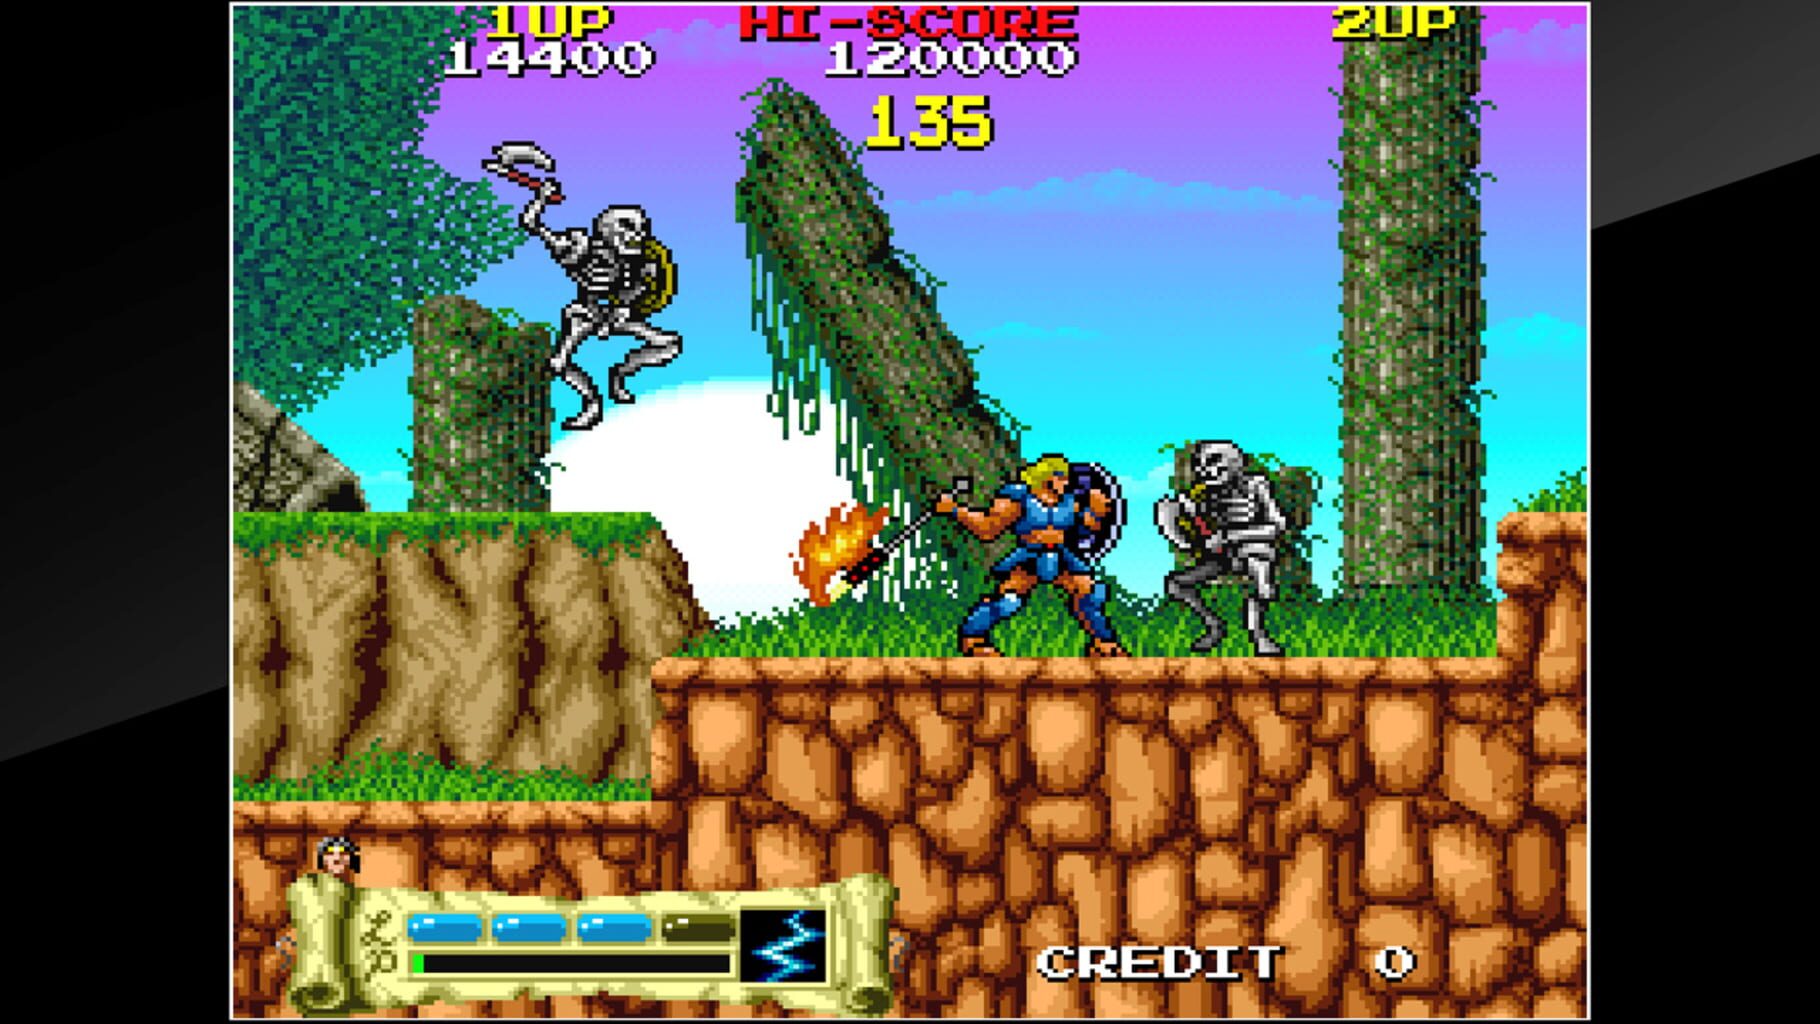 Arcade Archives: The Astyanax screenshot